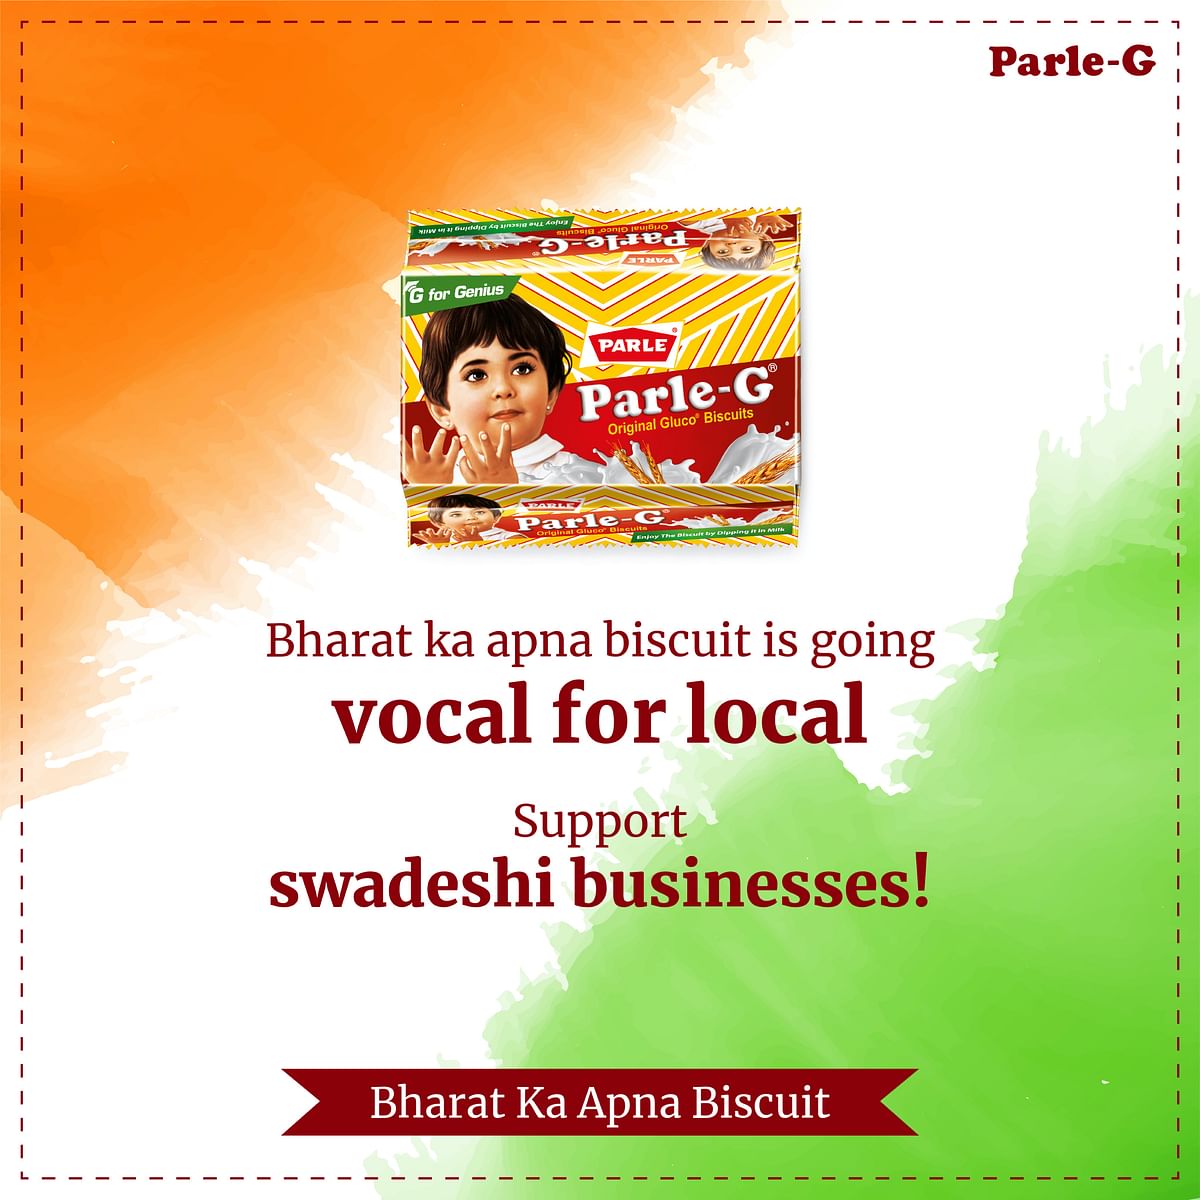 Parle supports #VocalforLocal